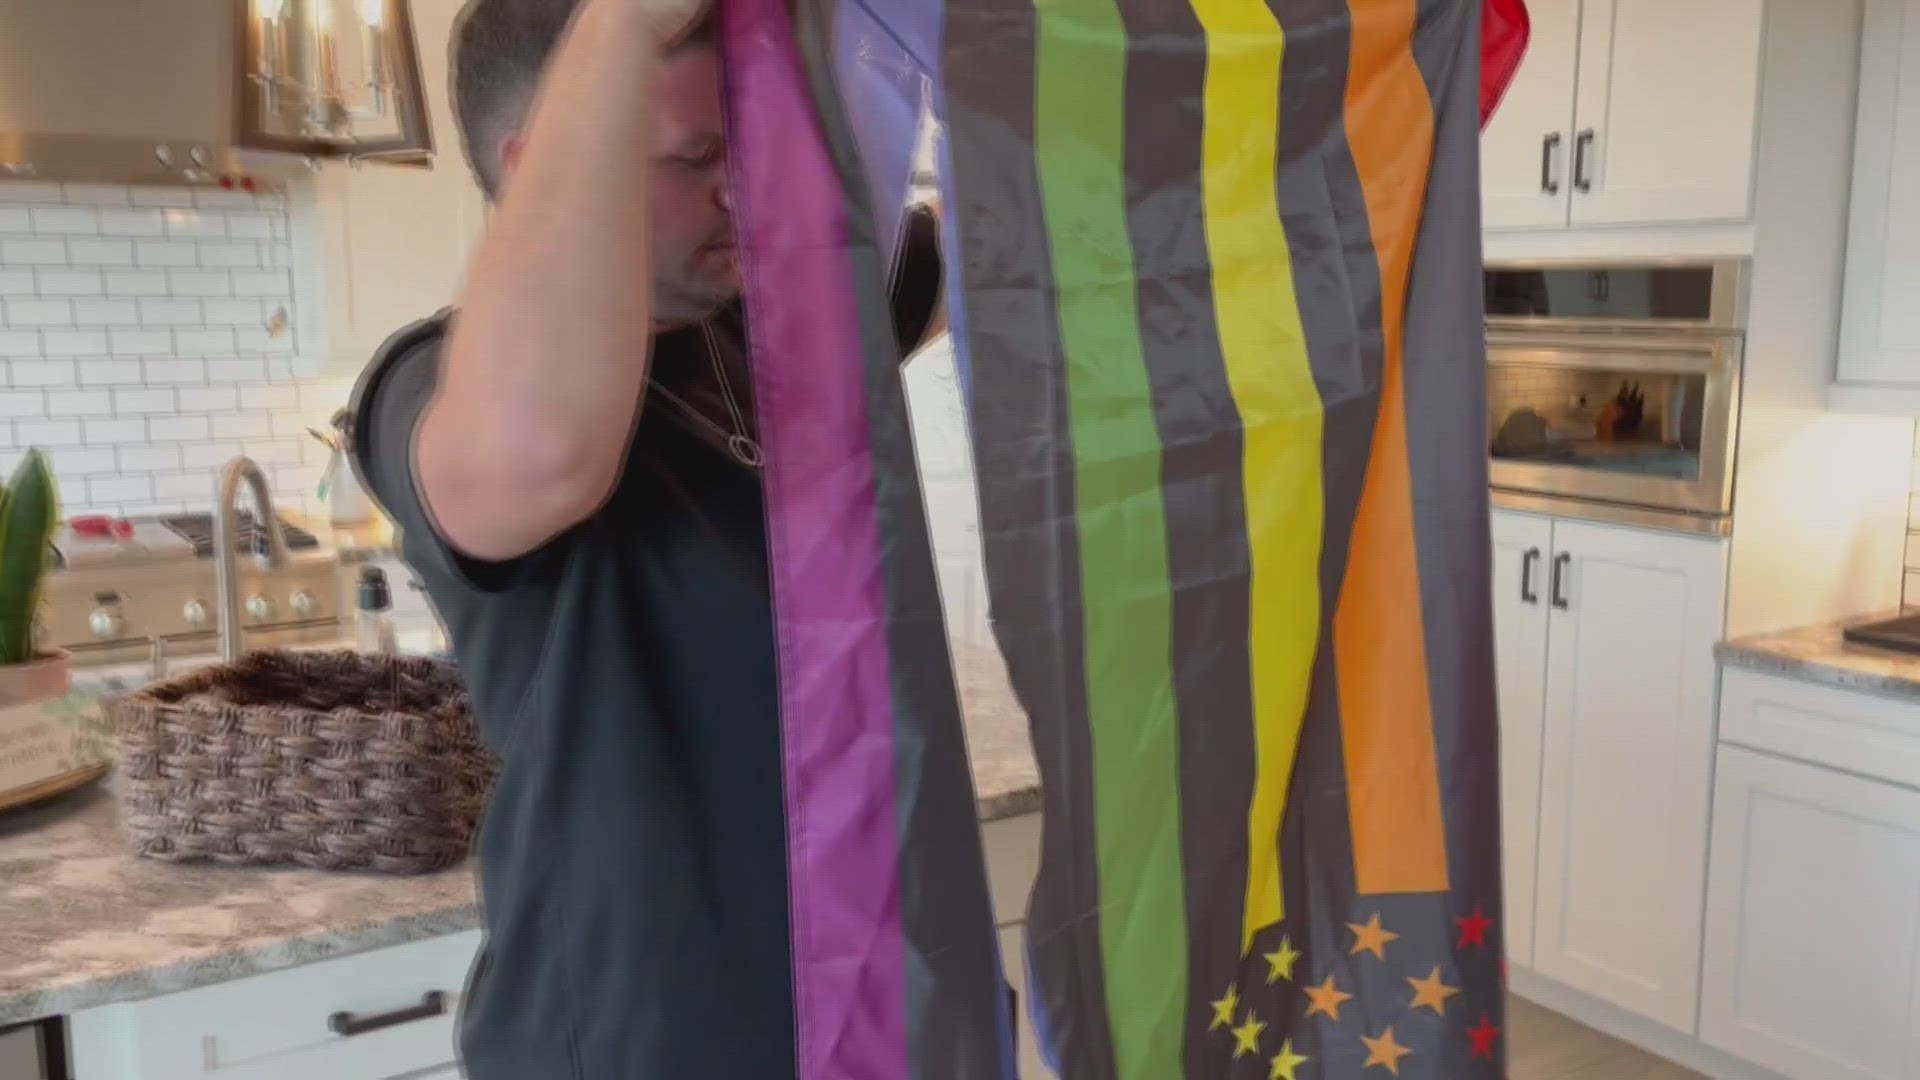 The Deluca's Pride Flag displayed outside their home has been vandalized multiple times since December